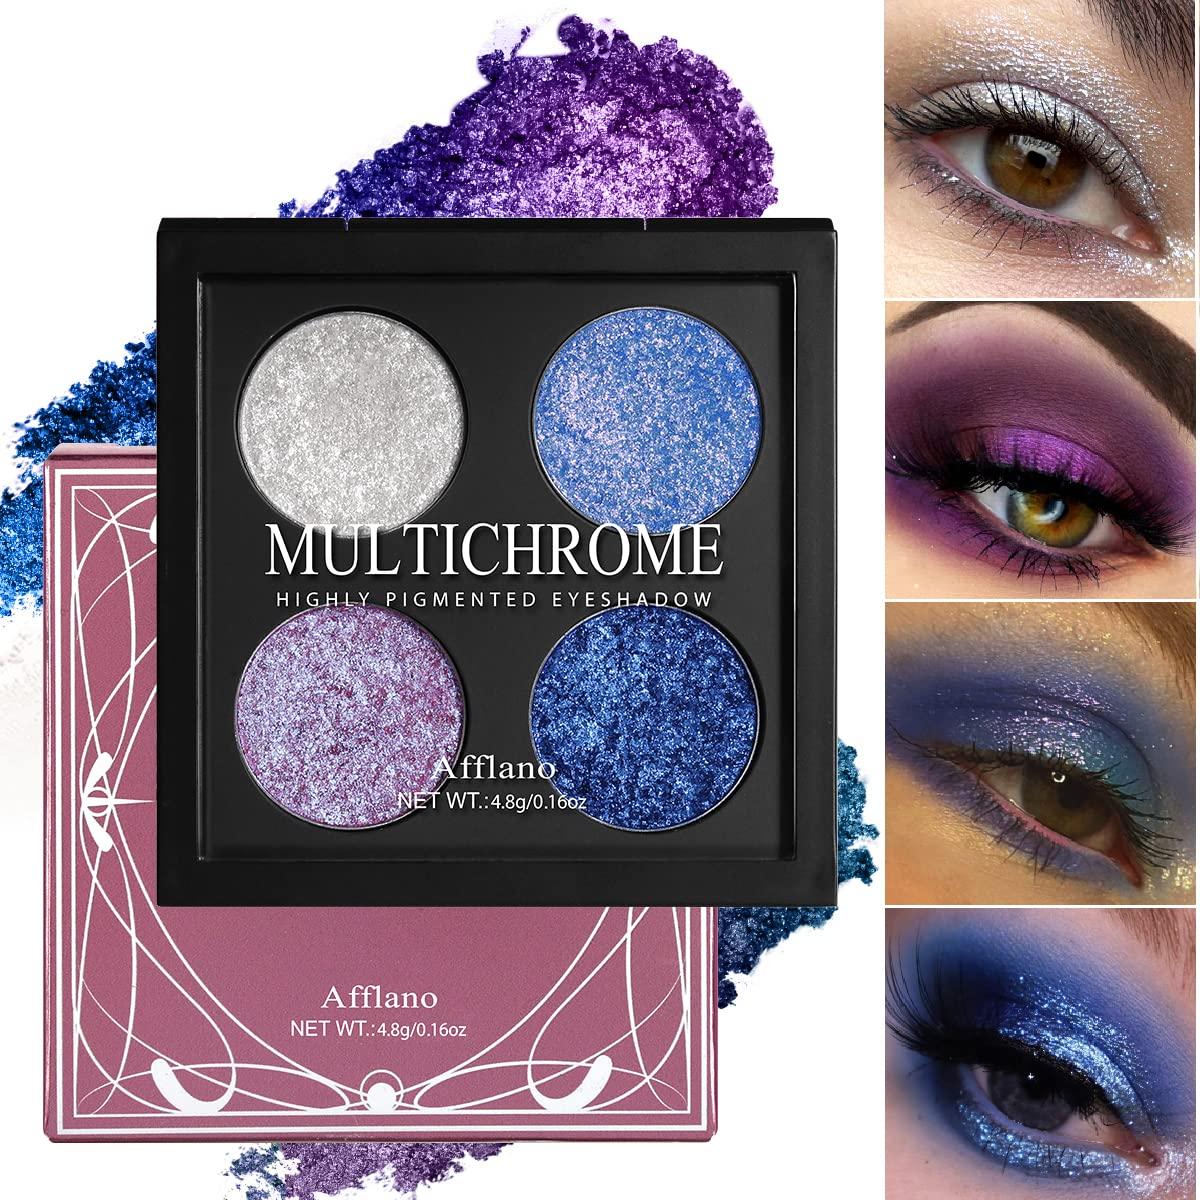 Afflano Holographic Eyeshadow Glitter, Color Change Multichrome Eyeshadow  Silver Blue Shimmer Metallic Eye Makeup, Sparkling Pigment Chameleon Duo